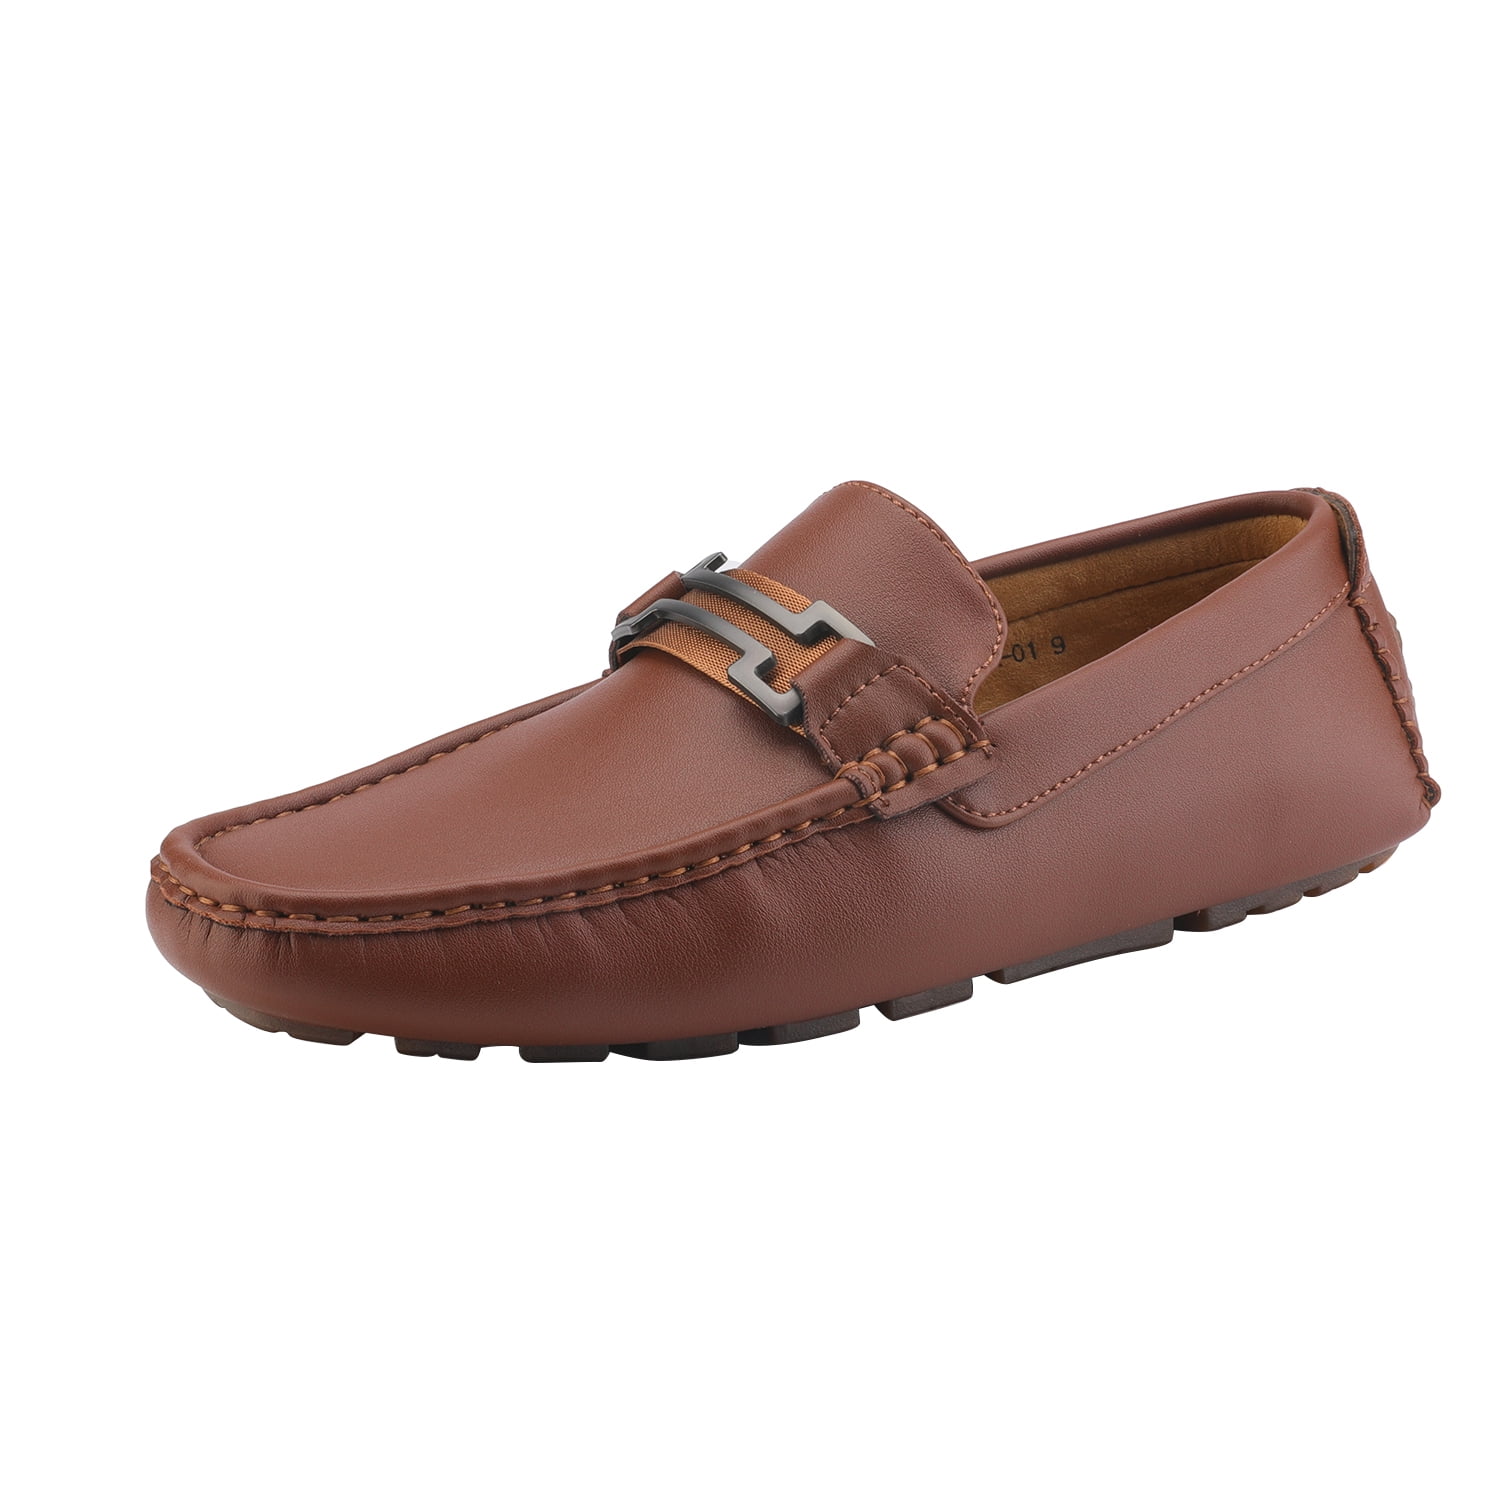 New Mens Soft & Comfy Casual Penny Loafers Moccasins Slip on Shoes UK Sizes 6-11 